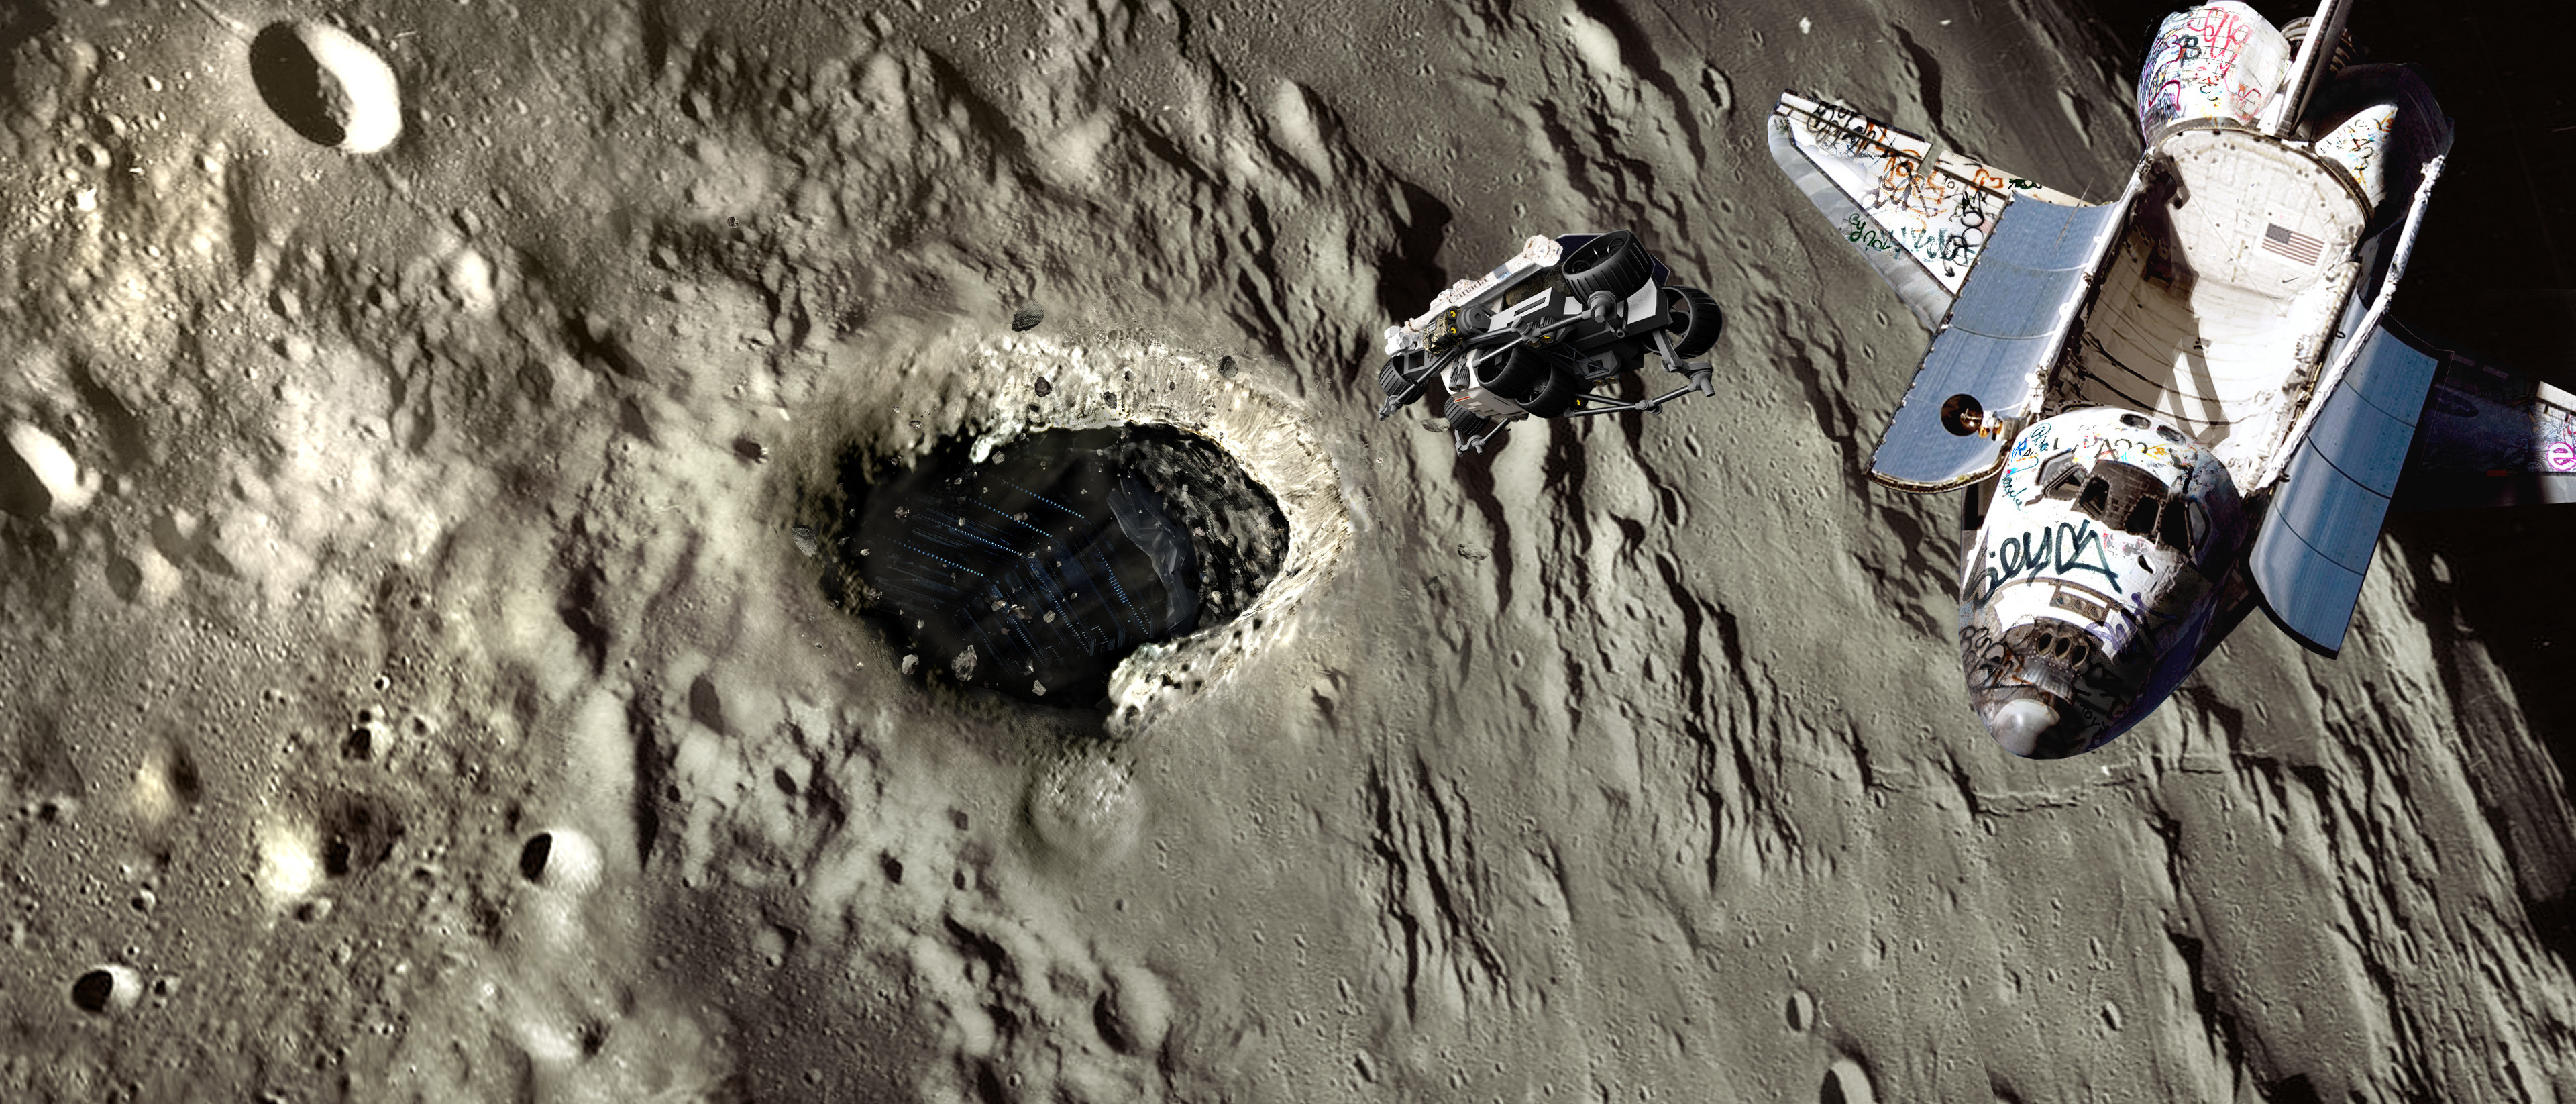 A later version of the moonlander entering a hole in our moon's surface.